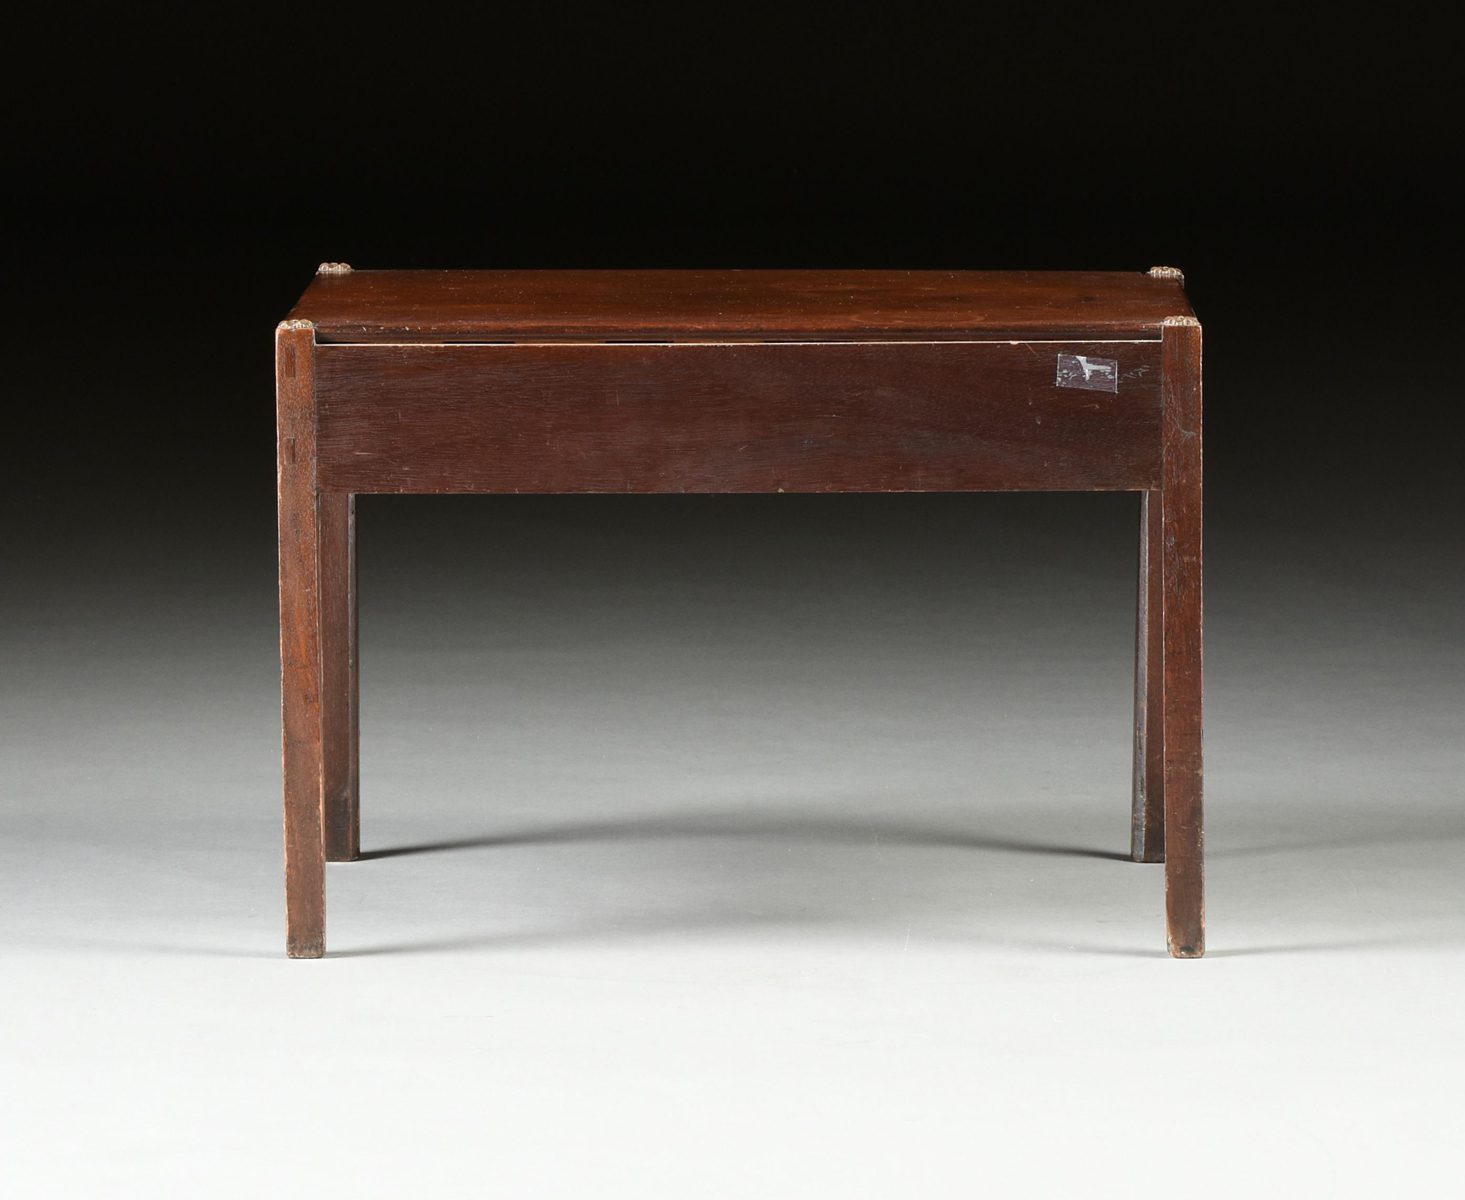 A GEORGE III MAHOGANY LOW SIDE TABLE, LATE 18TH/EARLY 19TH CENTURY, the rectangular top above a - Image 6 of 6